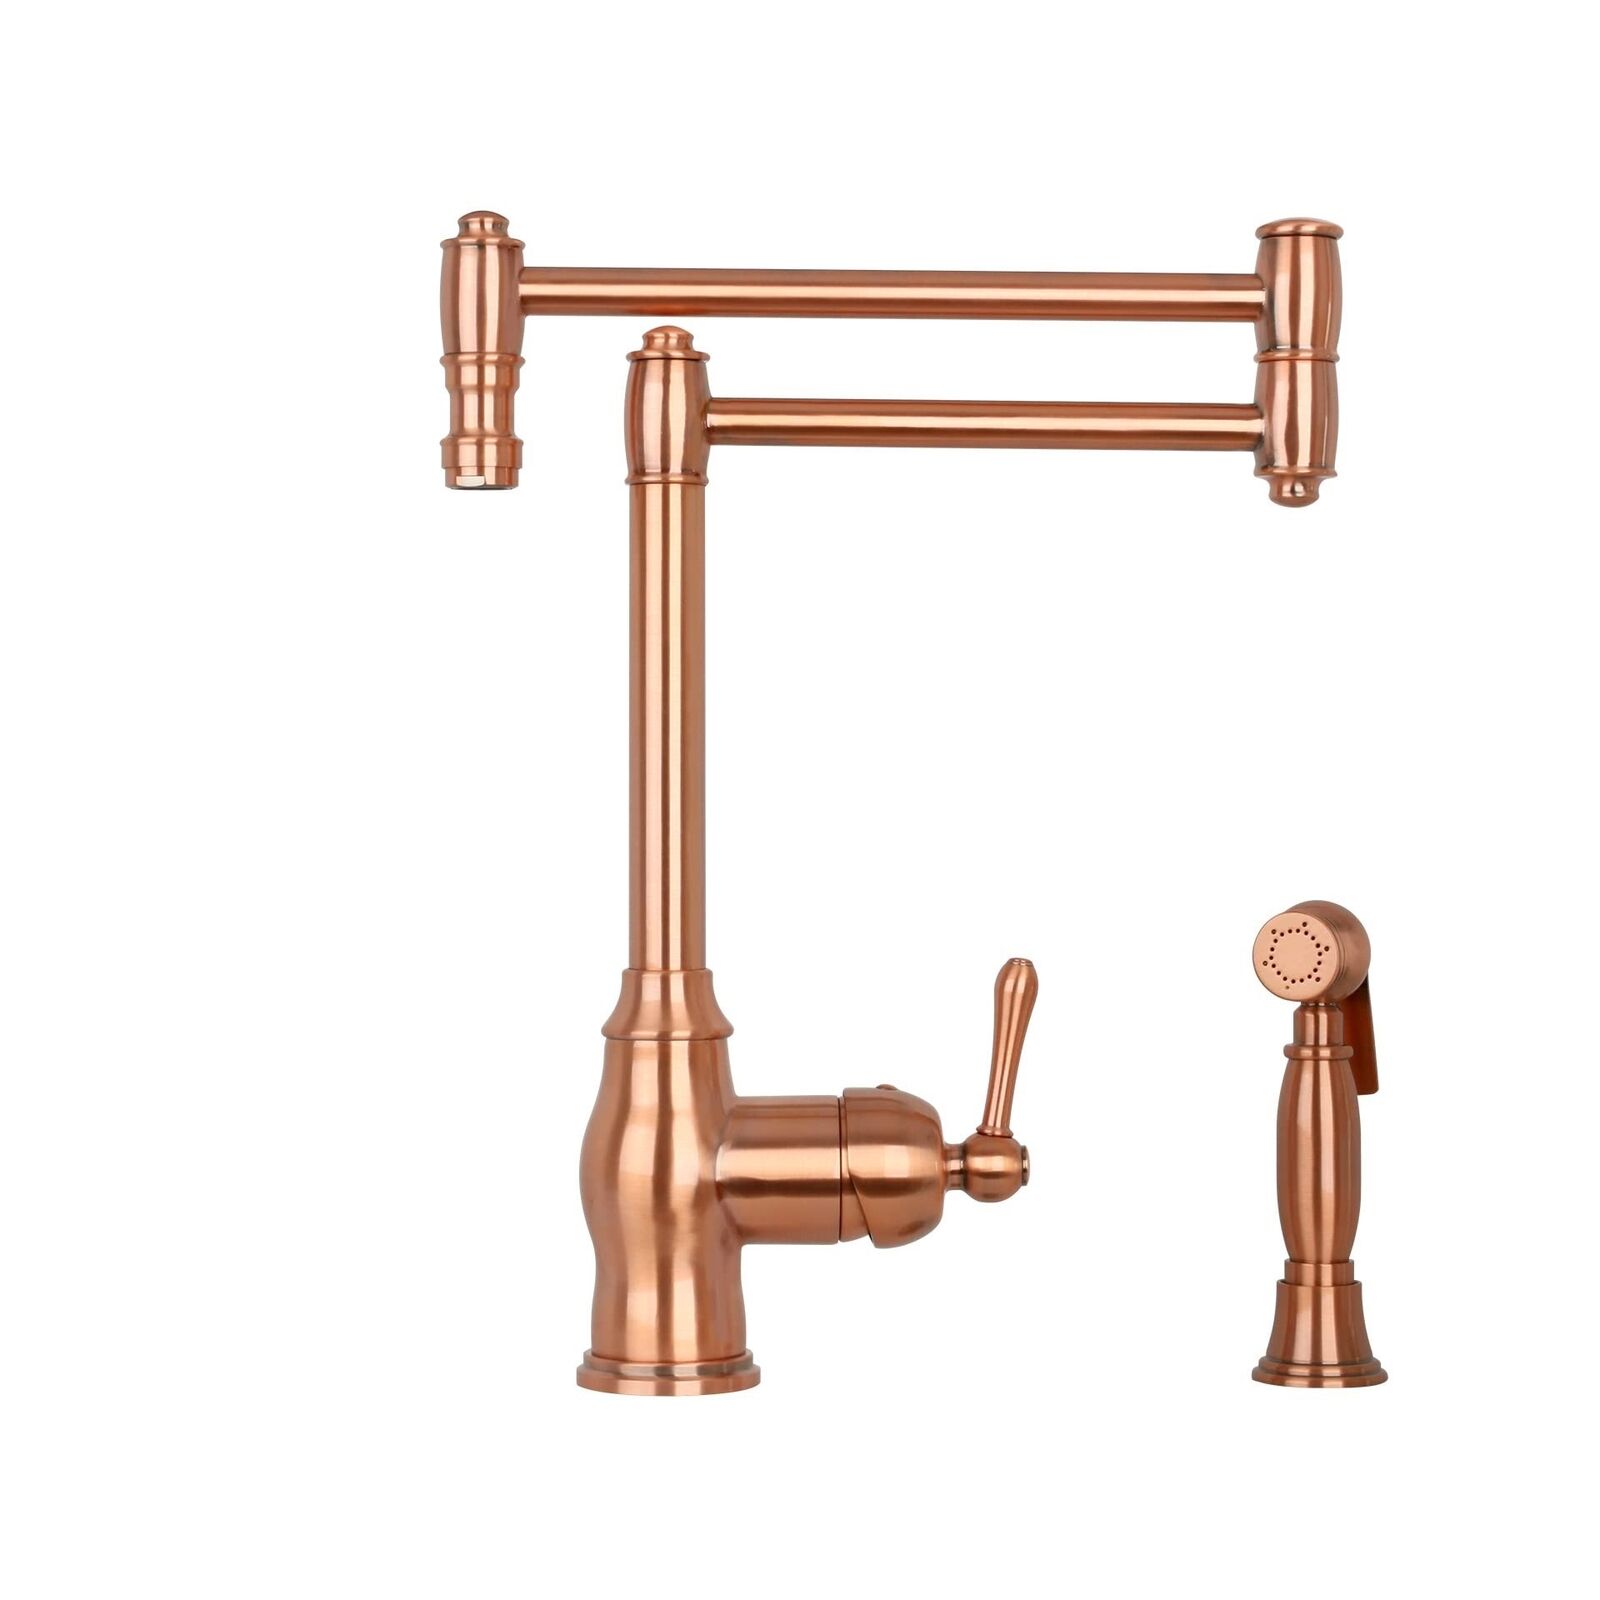 thinkstar Copper Deck-Mounted Double-Jointed Retractable Pot Filler, One-Handle Copper ...